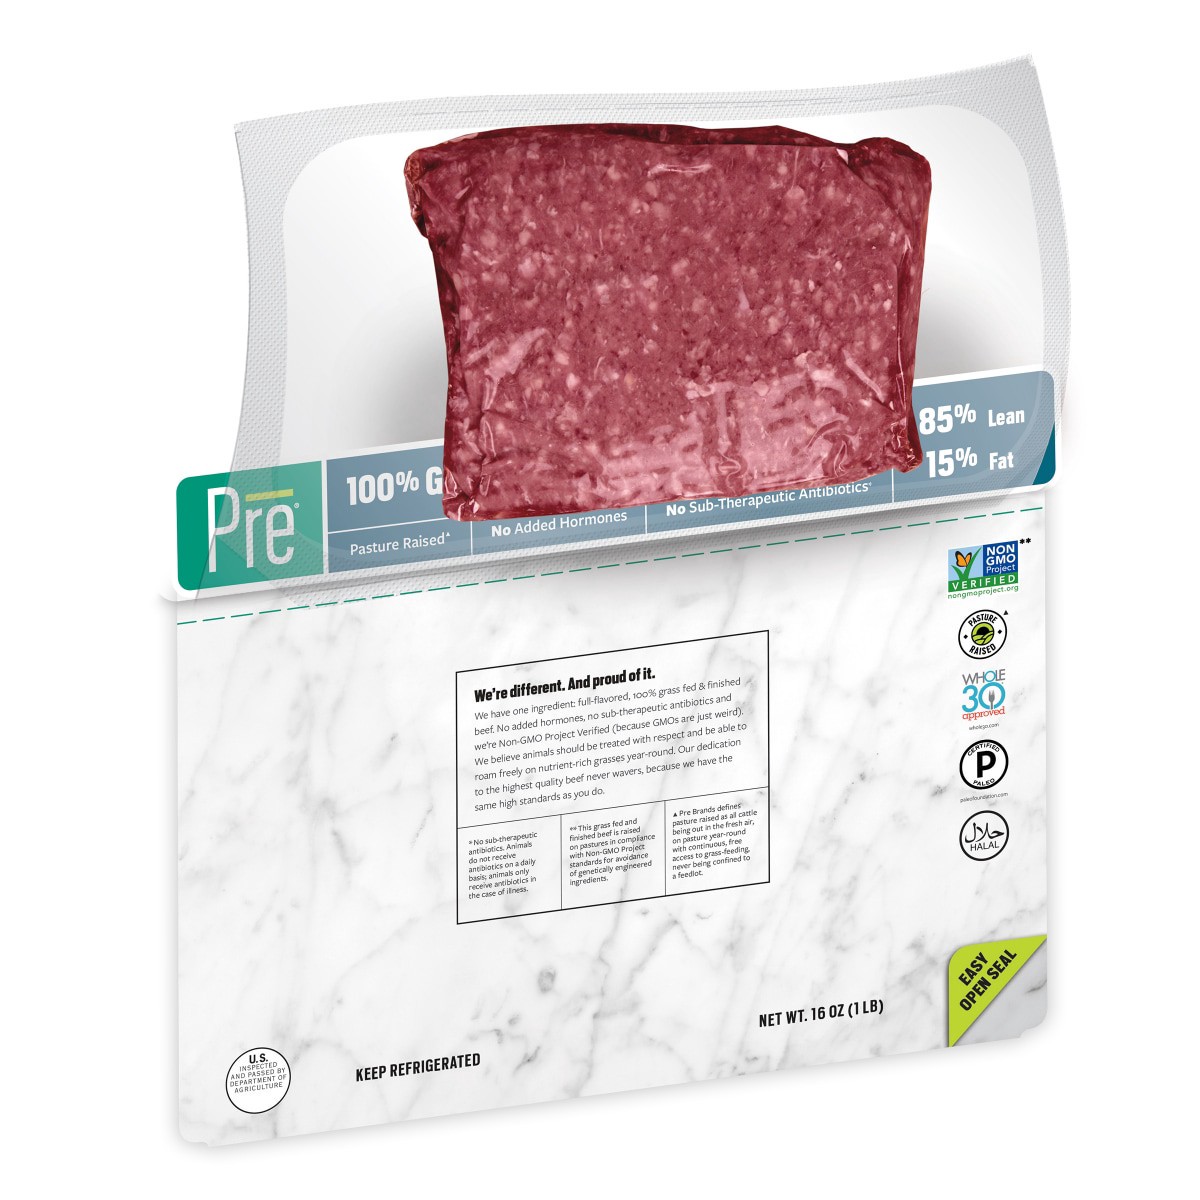 slide 5 of 21, Pre, 85% Lean Ground Beef 100% Grass-Fed, Grass- Finished, and Pasture-Raised, 16 oz